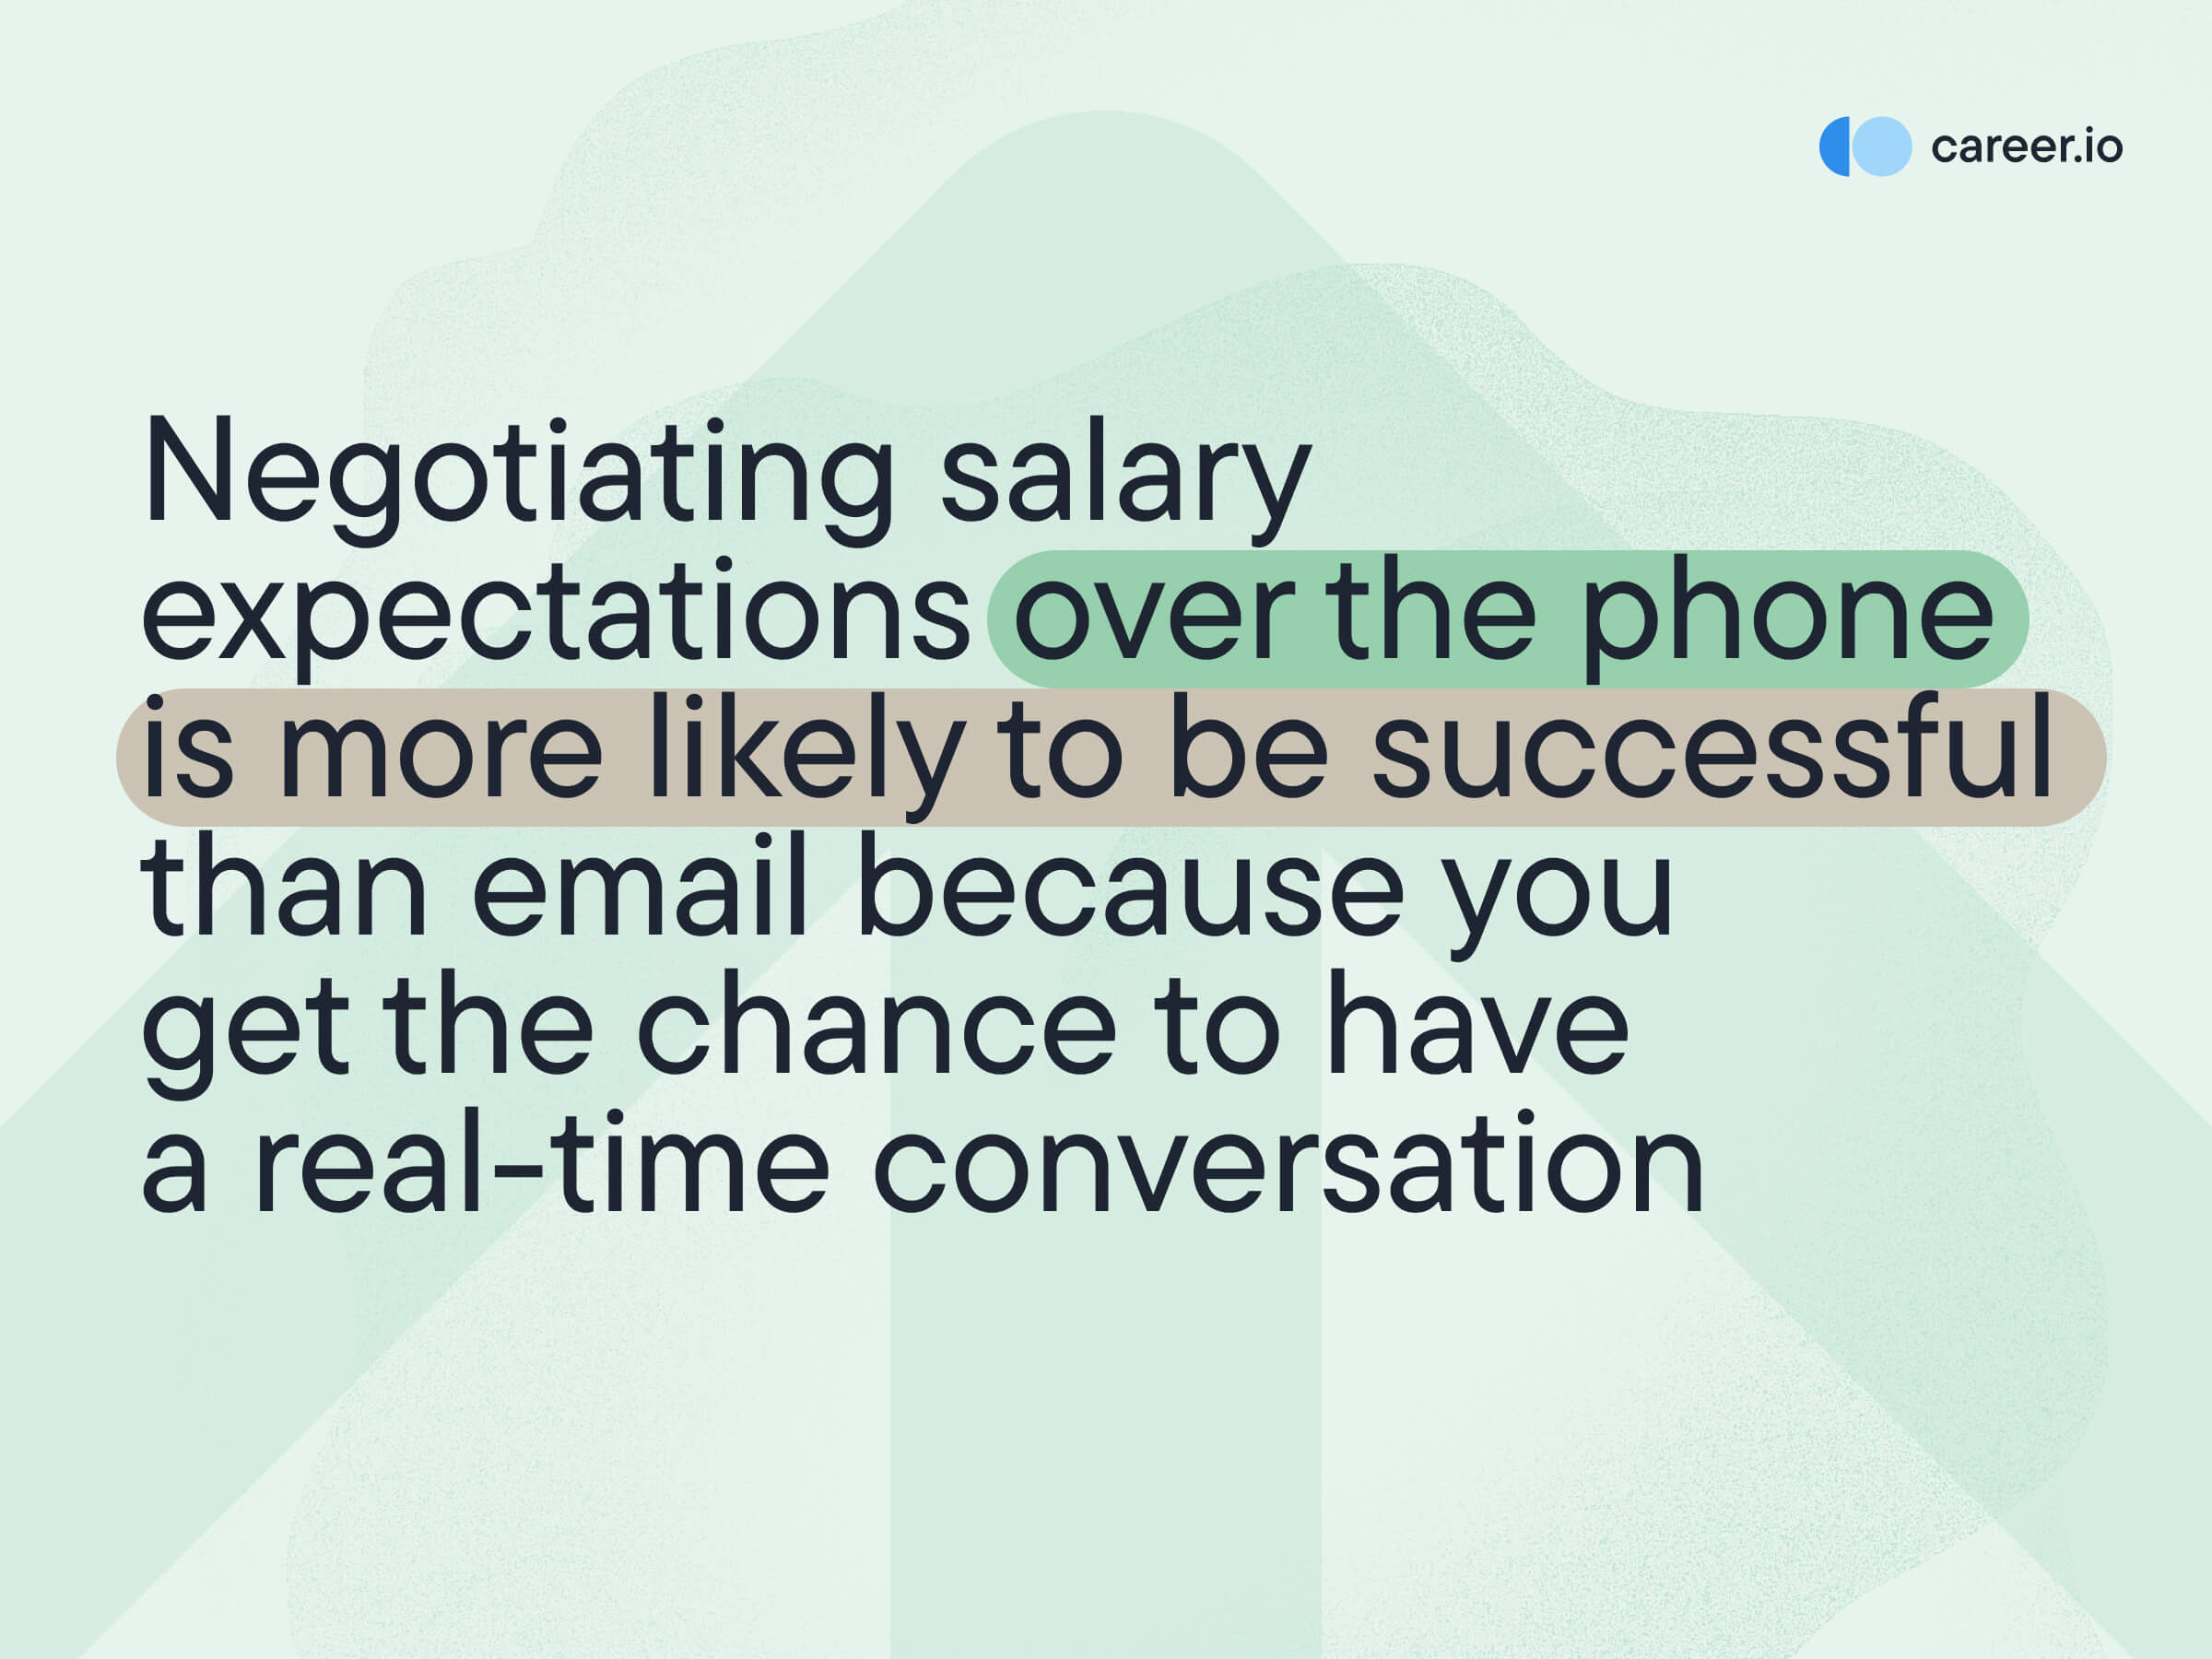 Learn how to negotiate a salary over the phone - image